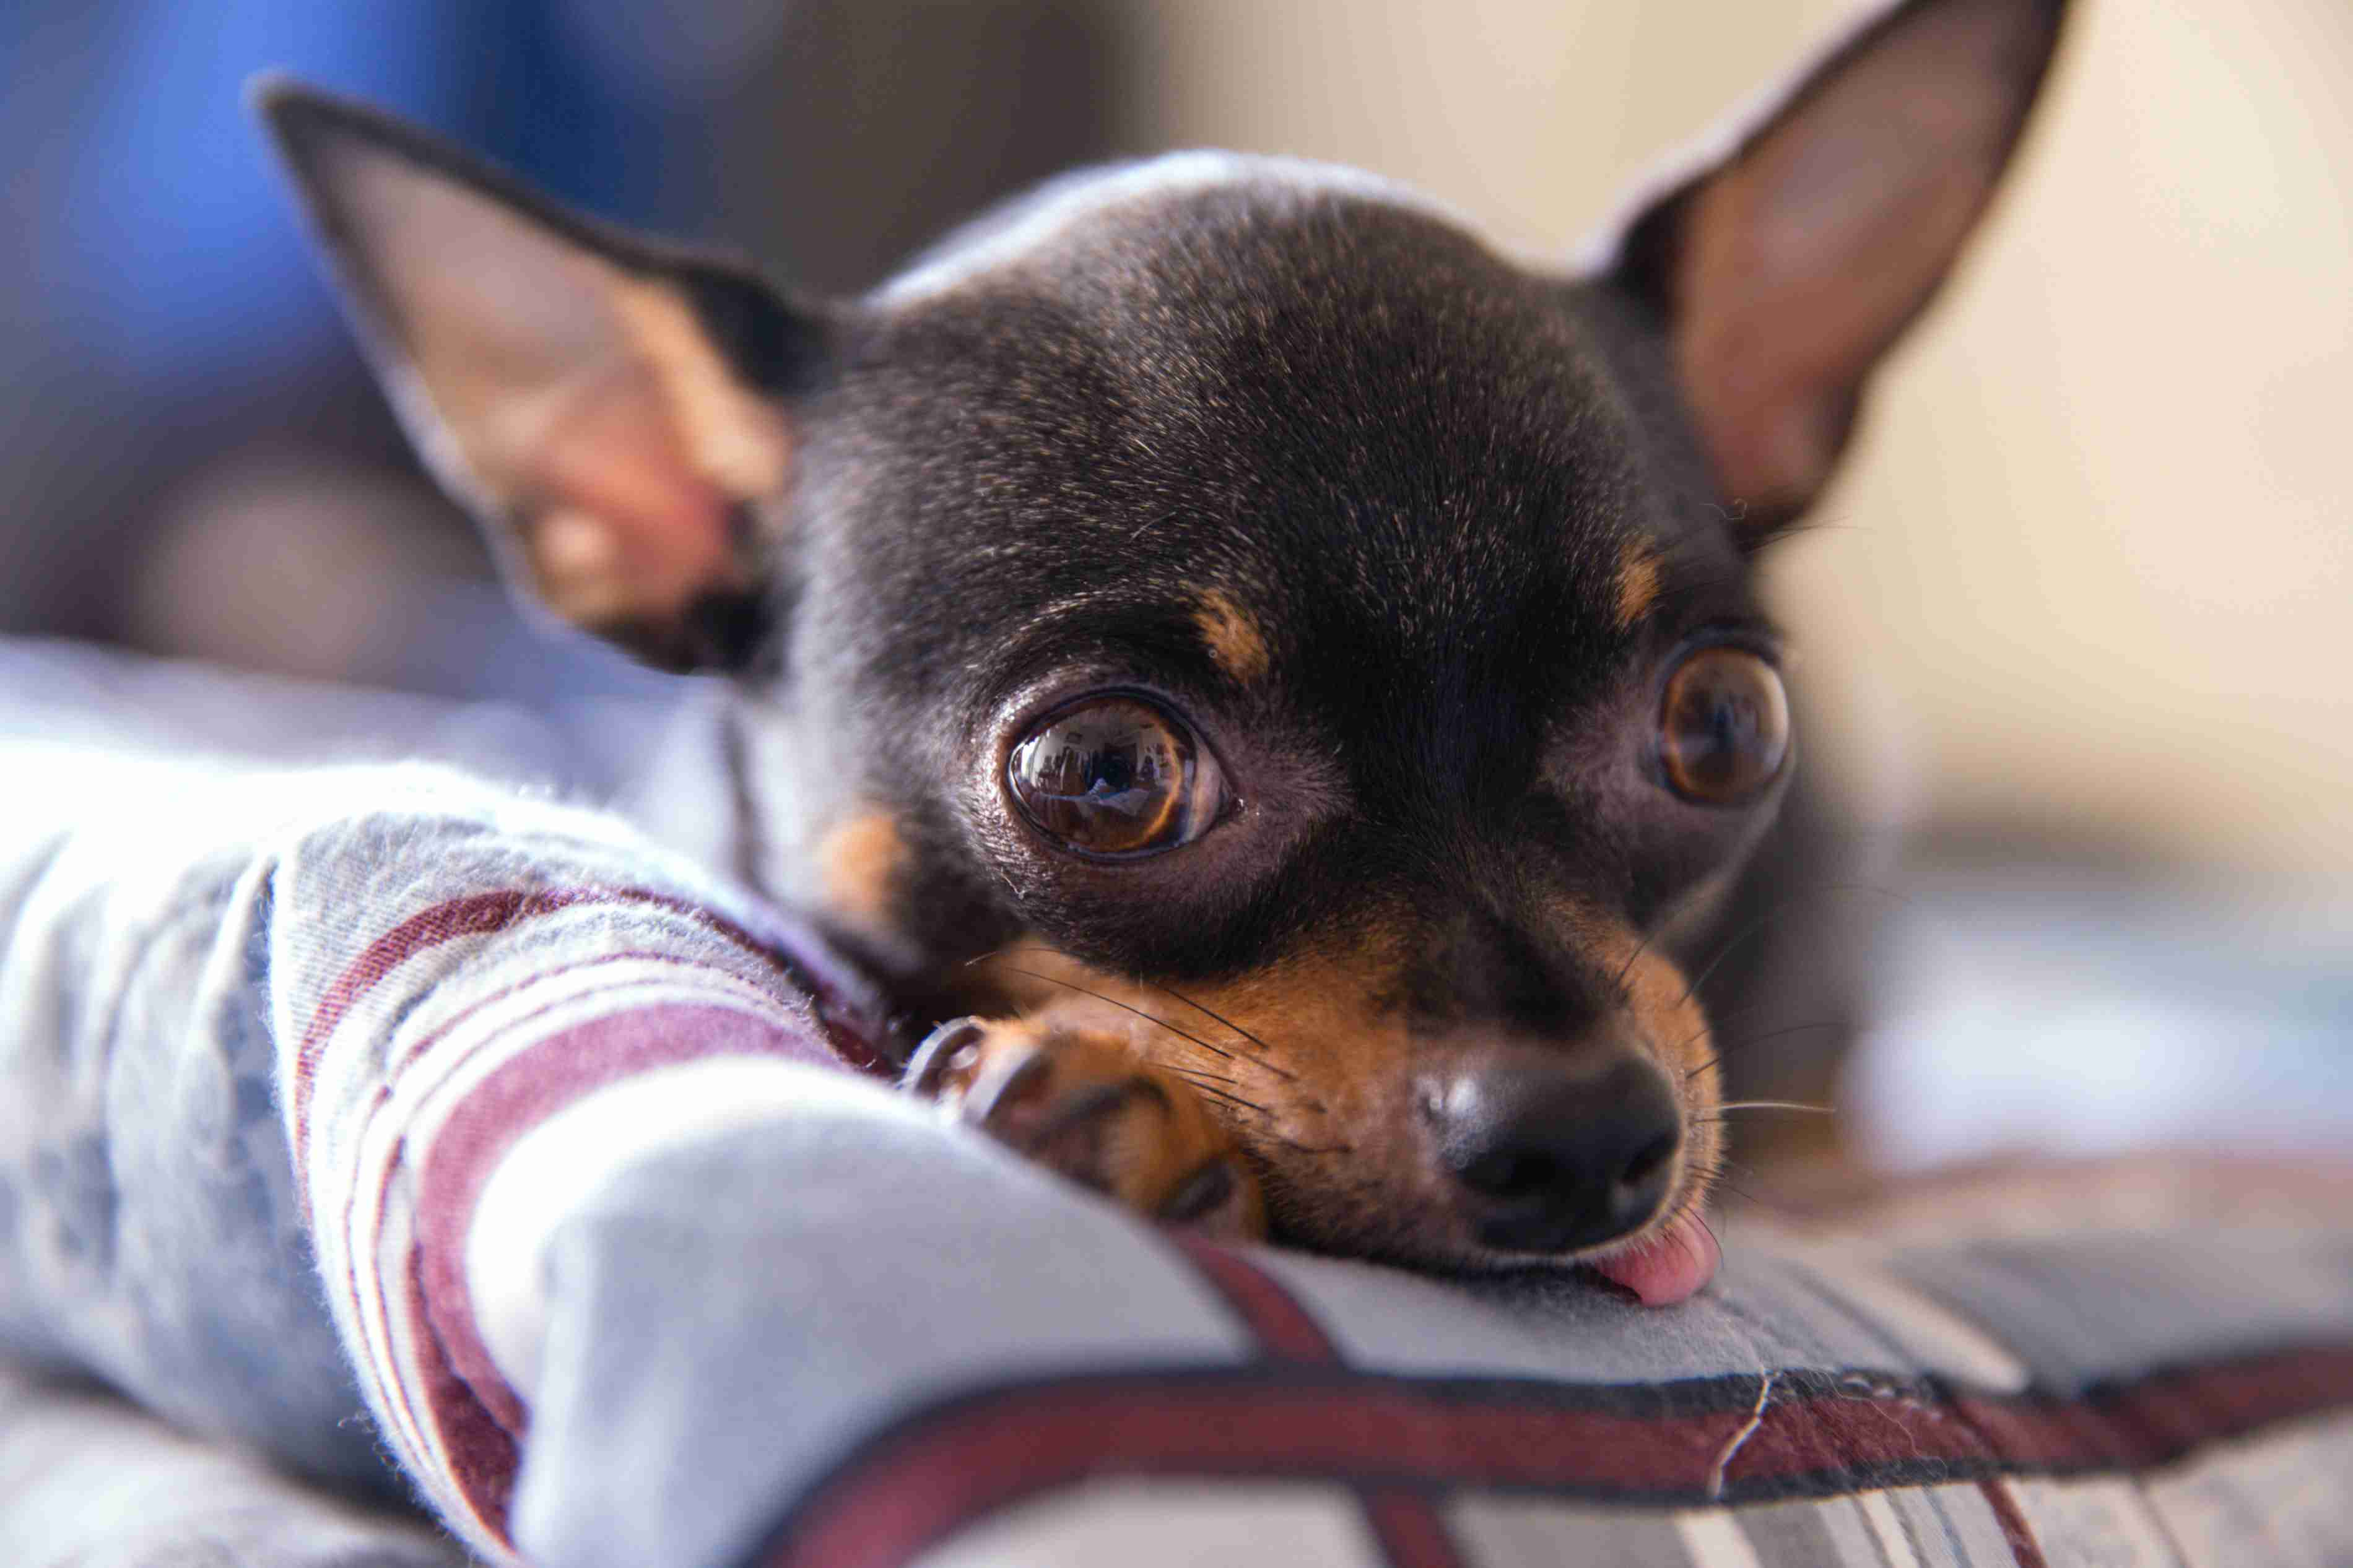 How can you teach a Chihuahua to appropriately express their emotions without resorting to anger?